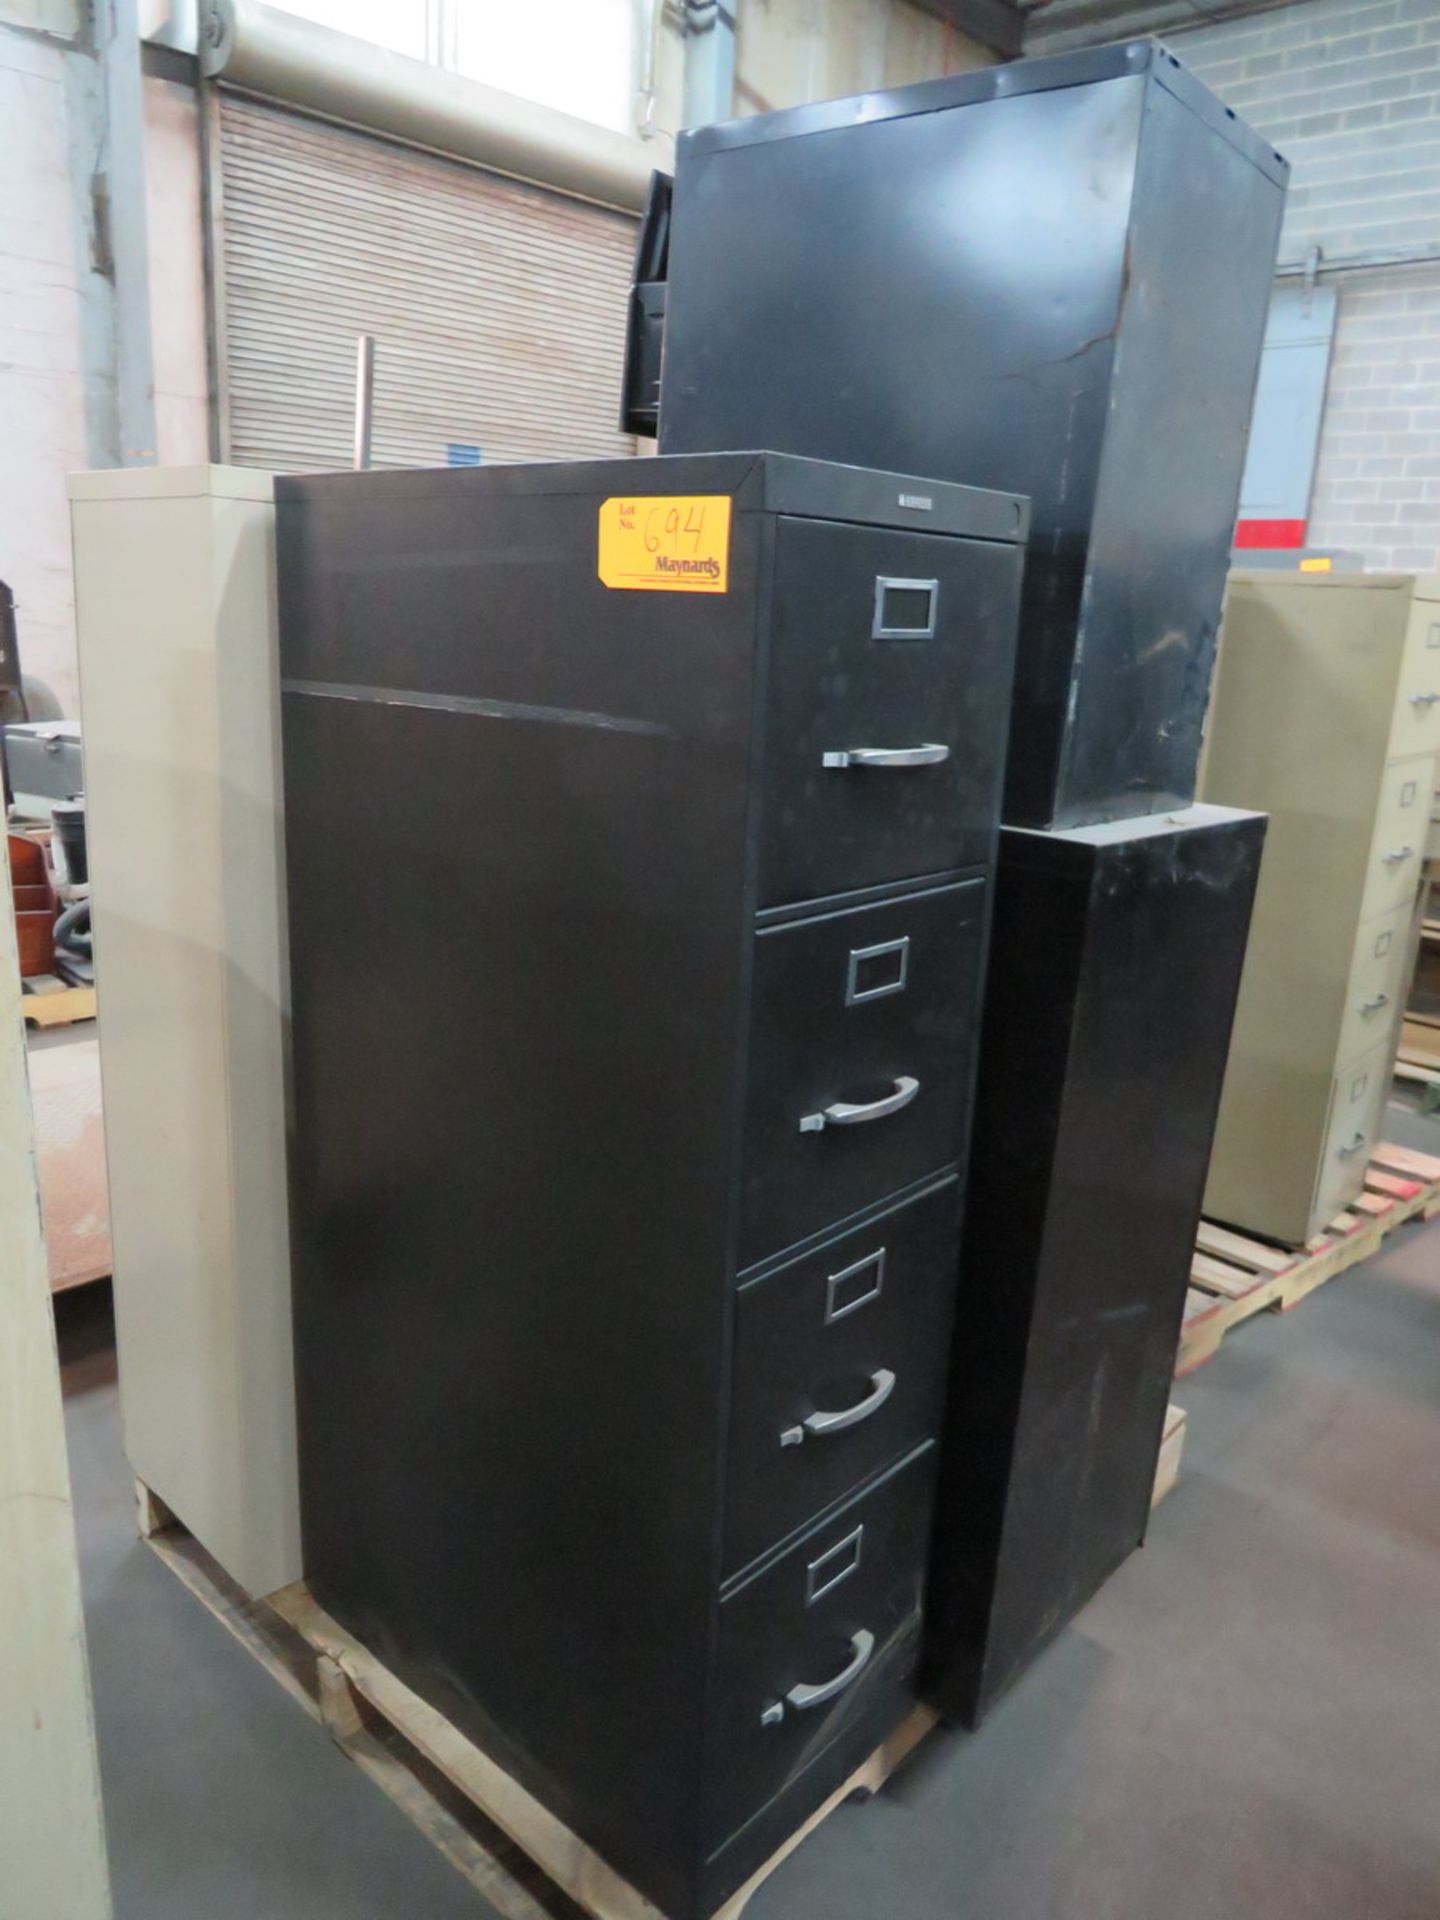 Lot of Assorted Office Furniture to Include: (2) 4-Drawer Metal Vertical Filing Cabinets; (1) 3-